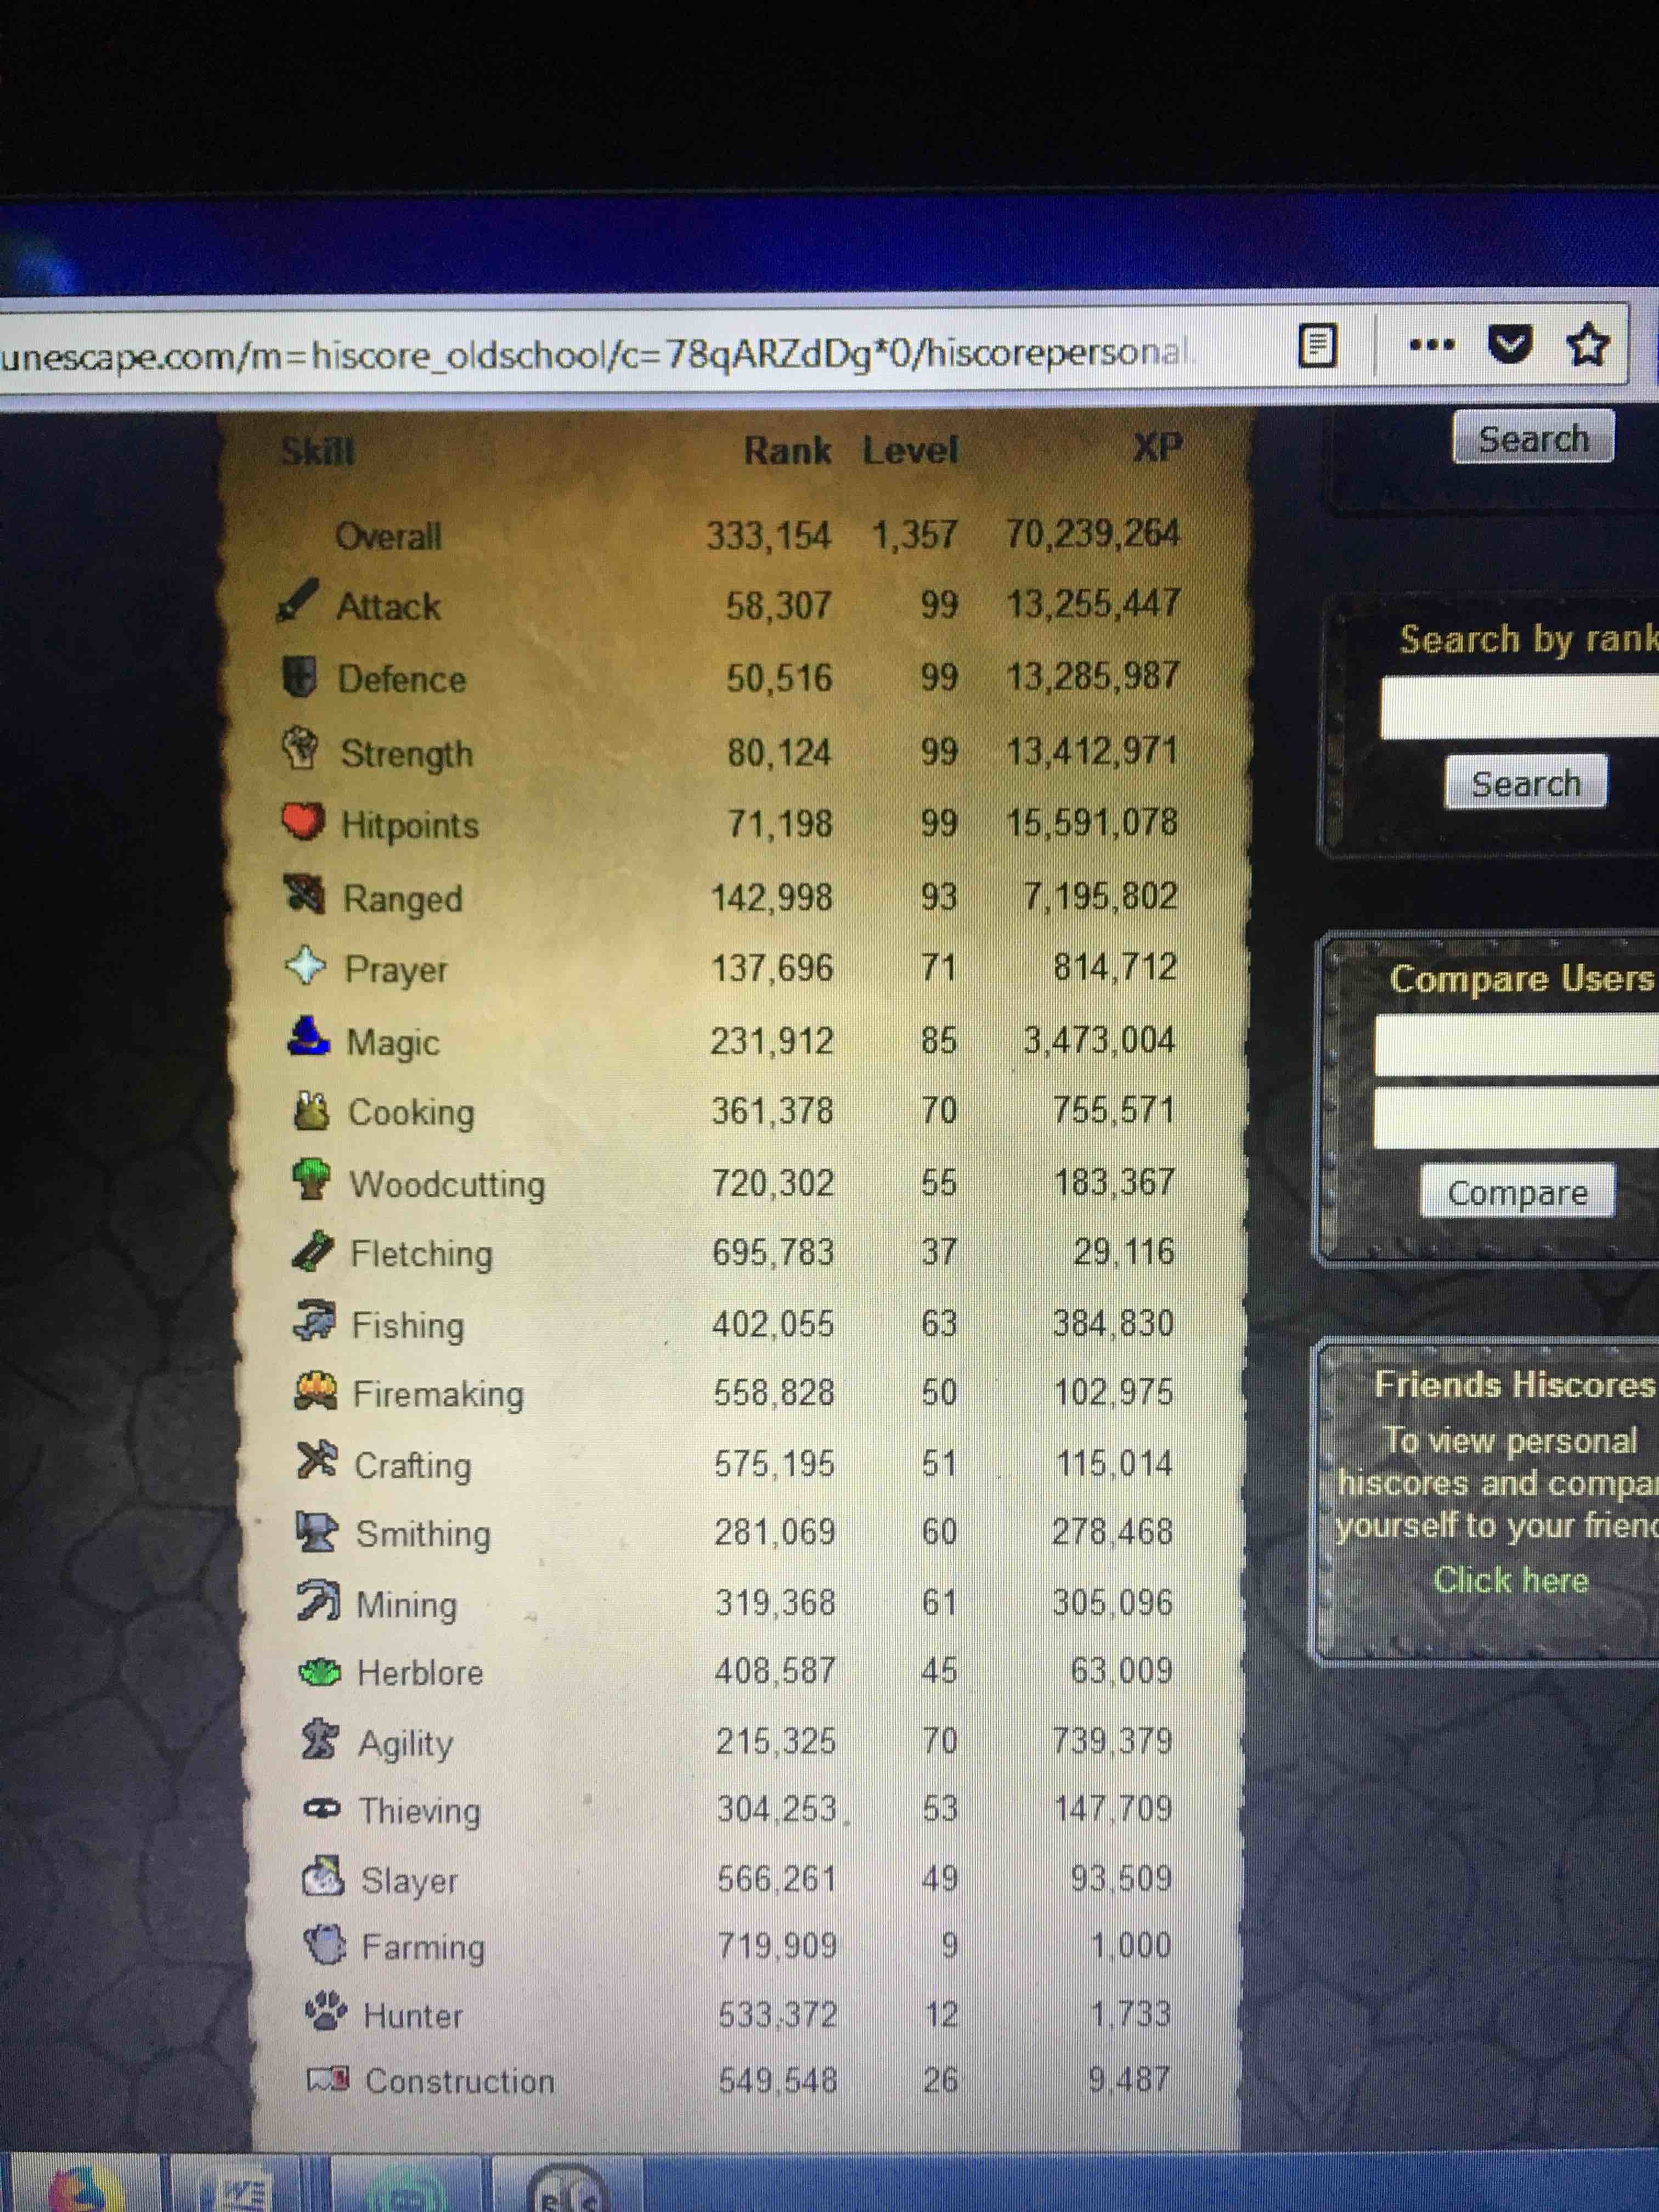 awesomesaucefilms runescape money making guide